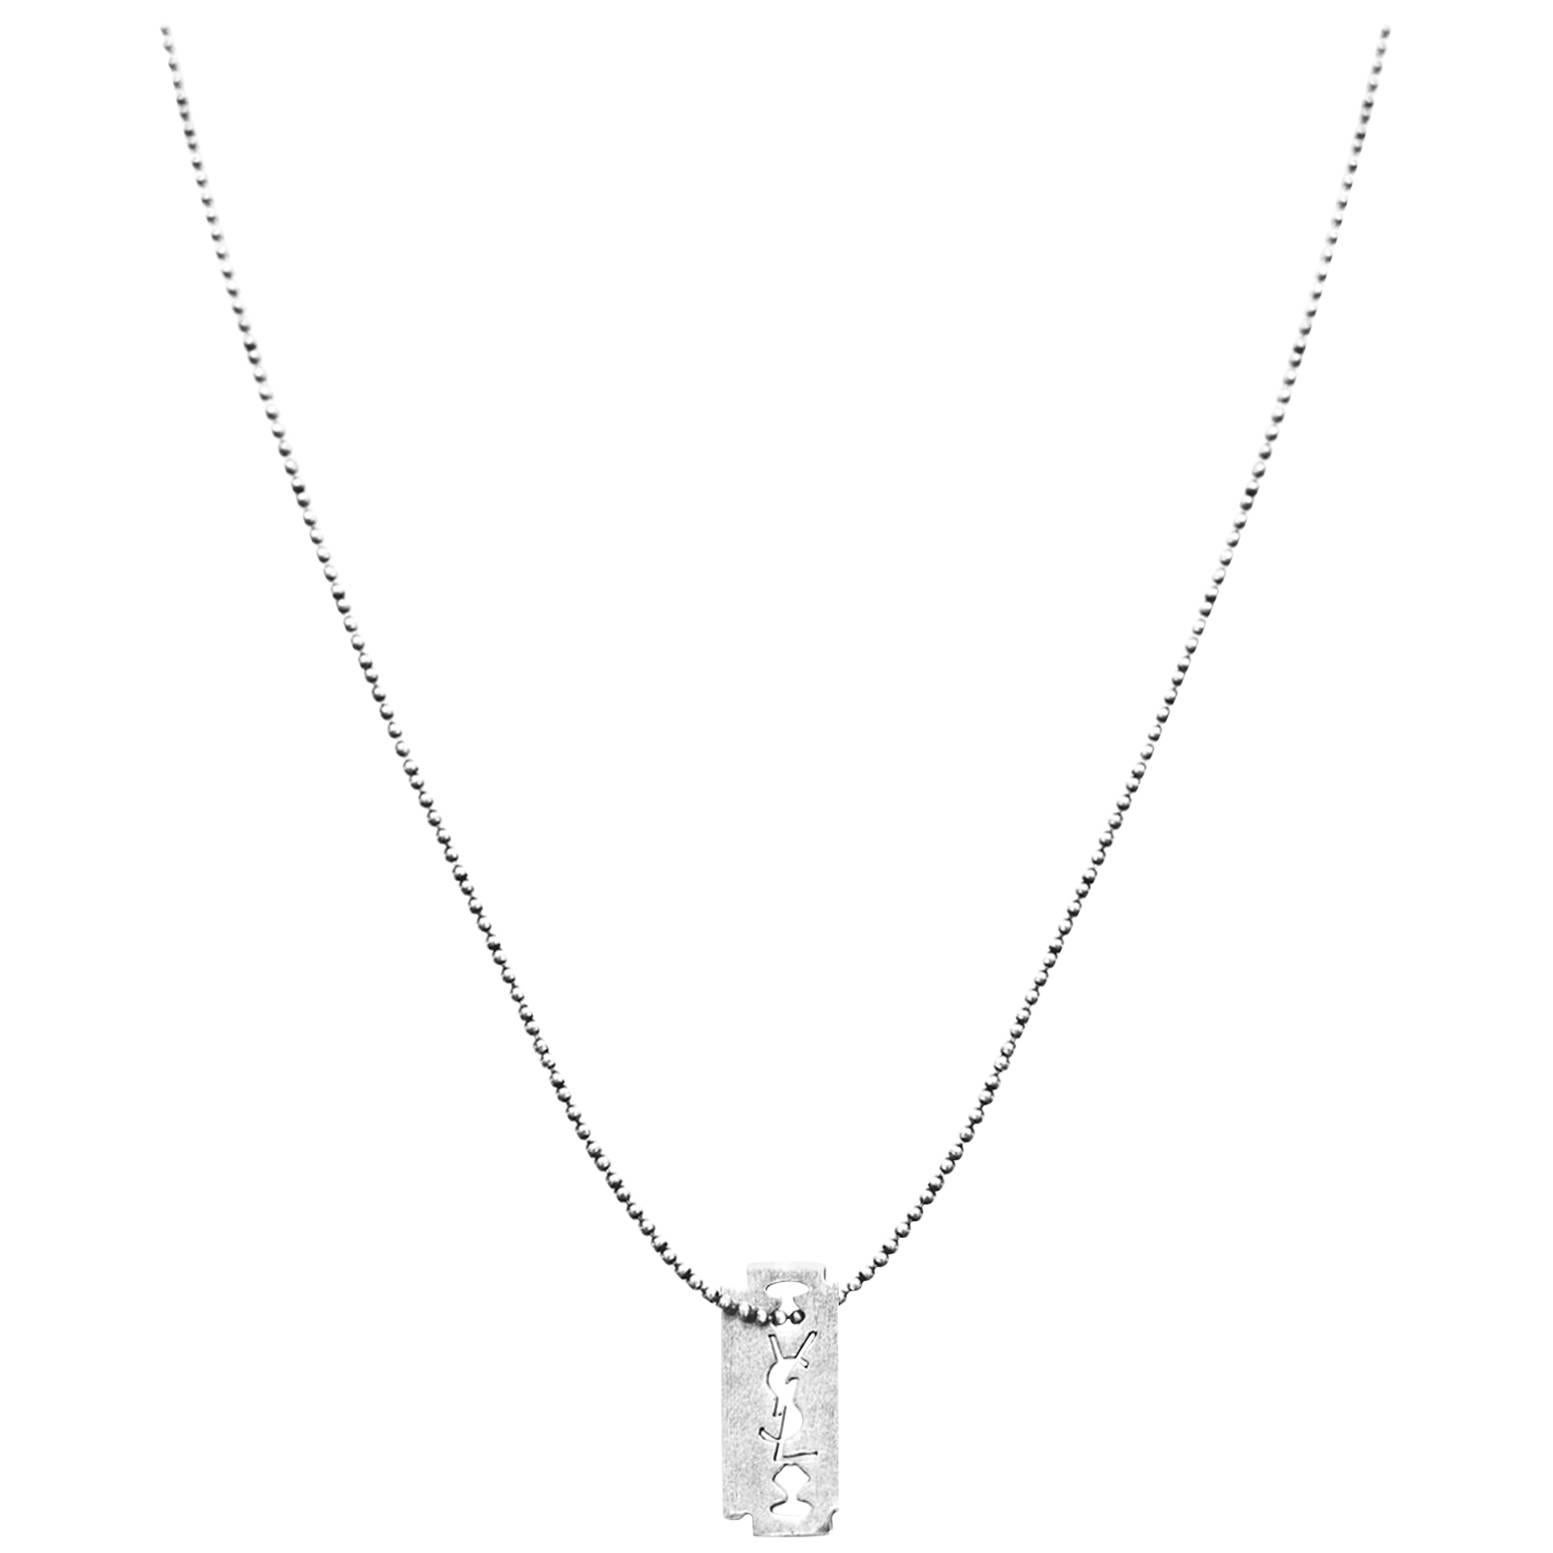 Saint Laurent 2017 Silvertone Razor Blade Necklace with Box at